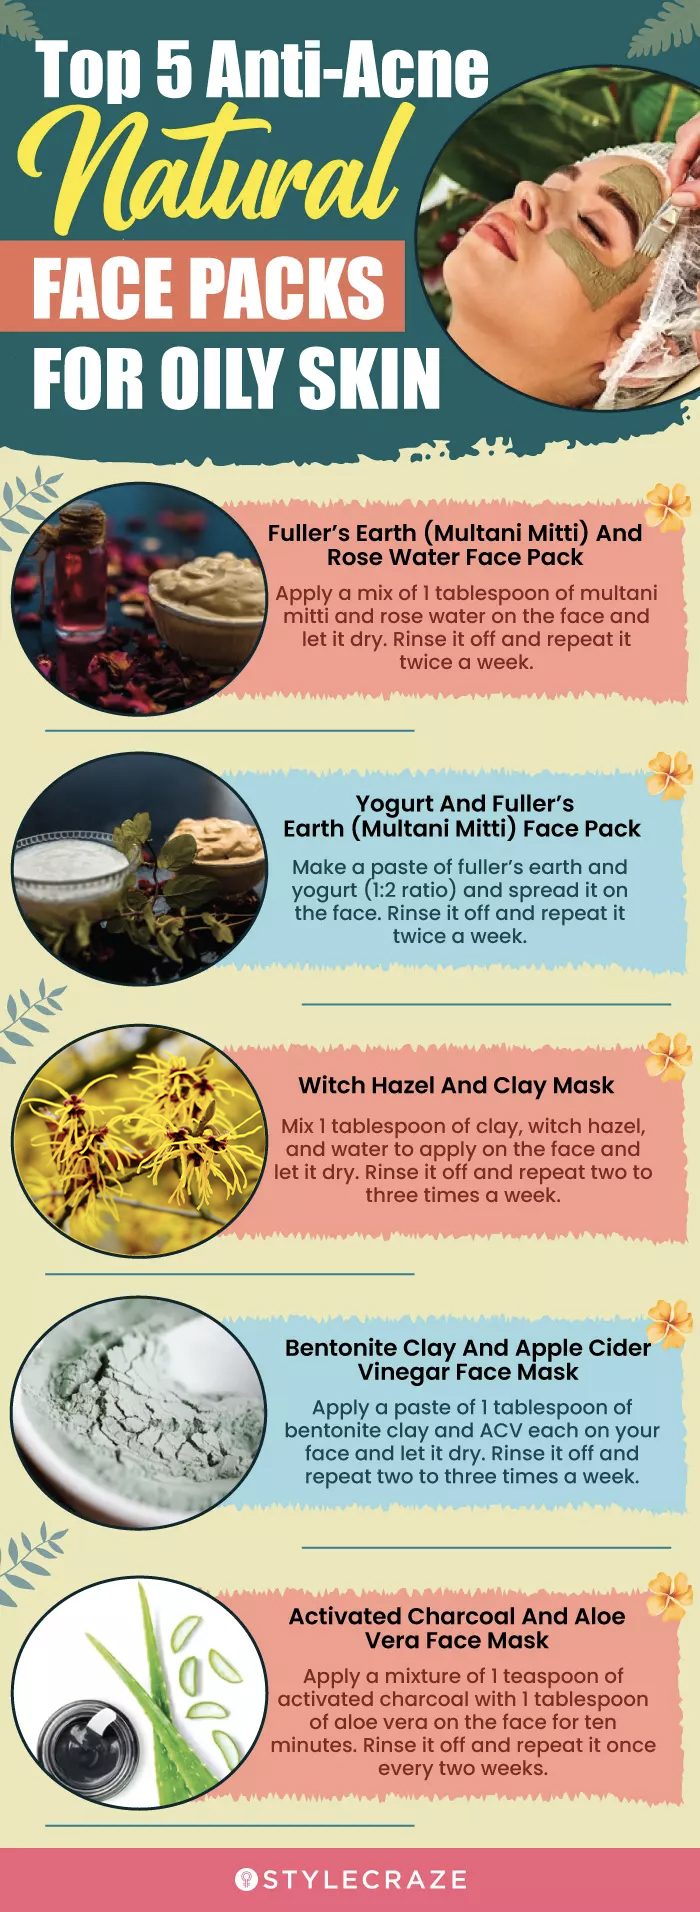 top 5 anti-acne natural face packs for oily skin (infographic)